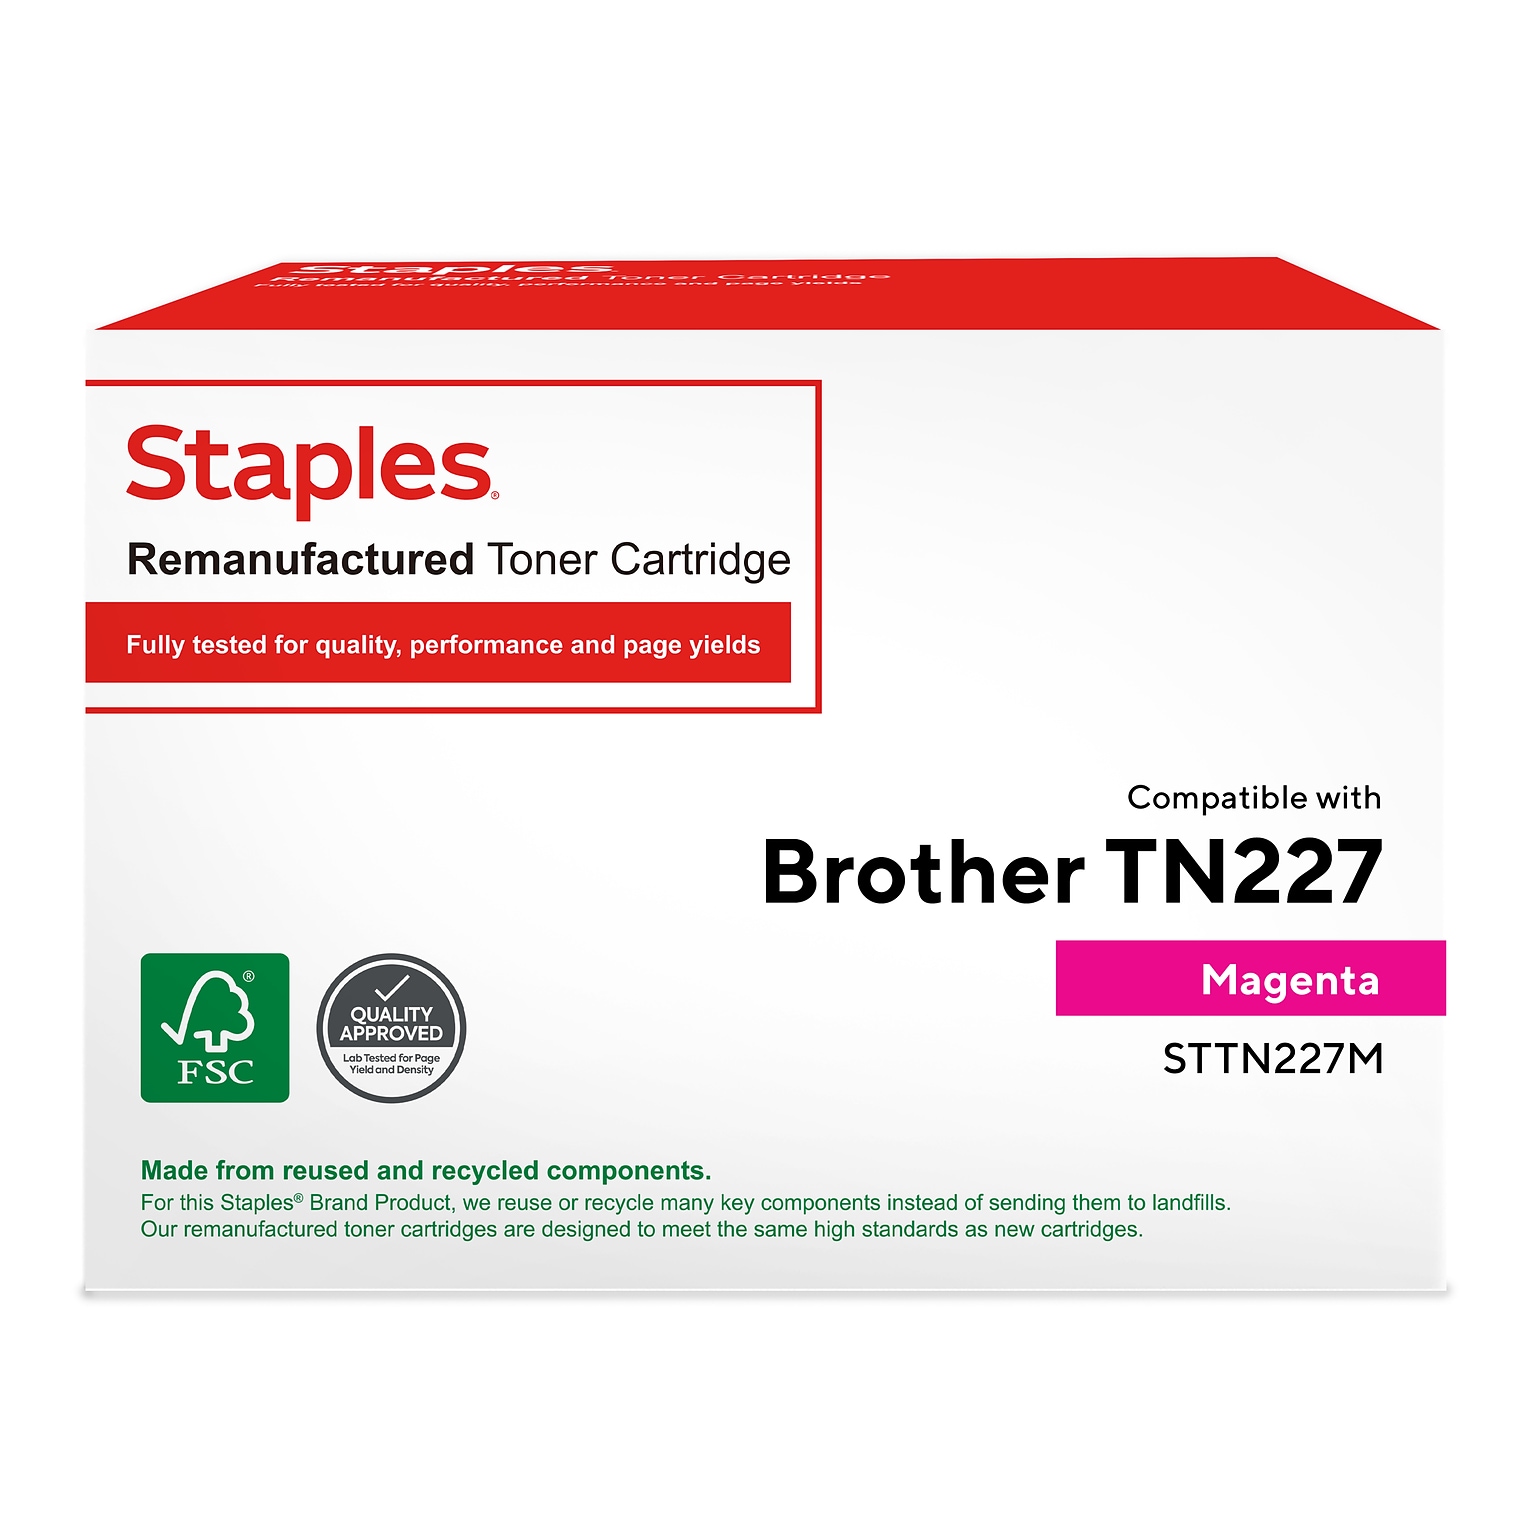 Staples Remanufactured Magenta High Yield Toner Cartridge Replacement for Brother (TRTN227M/STTN227M)